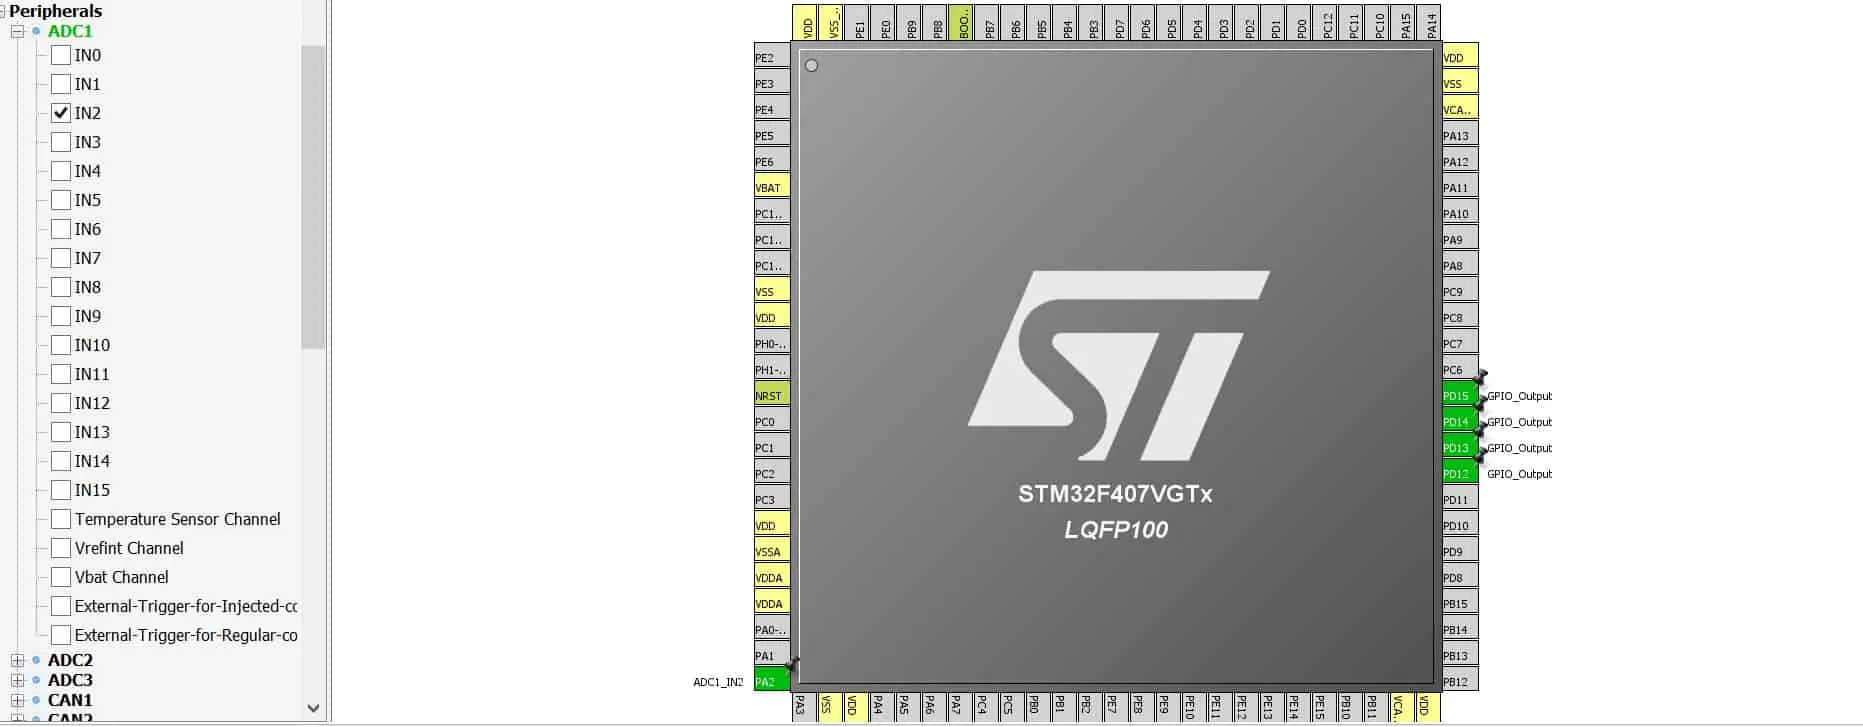 STM32 ADC pins configuration.